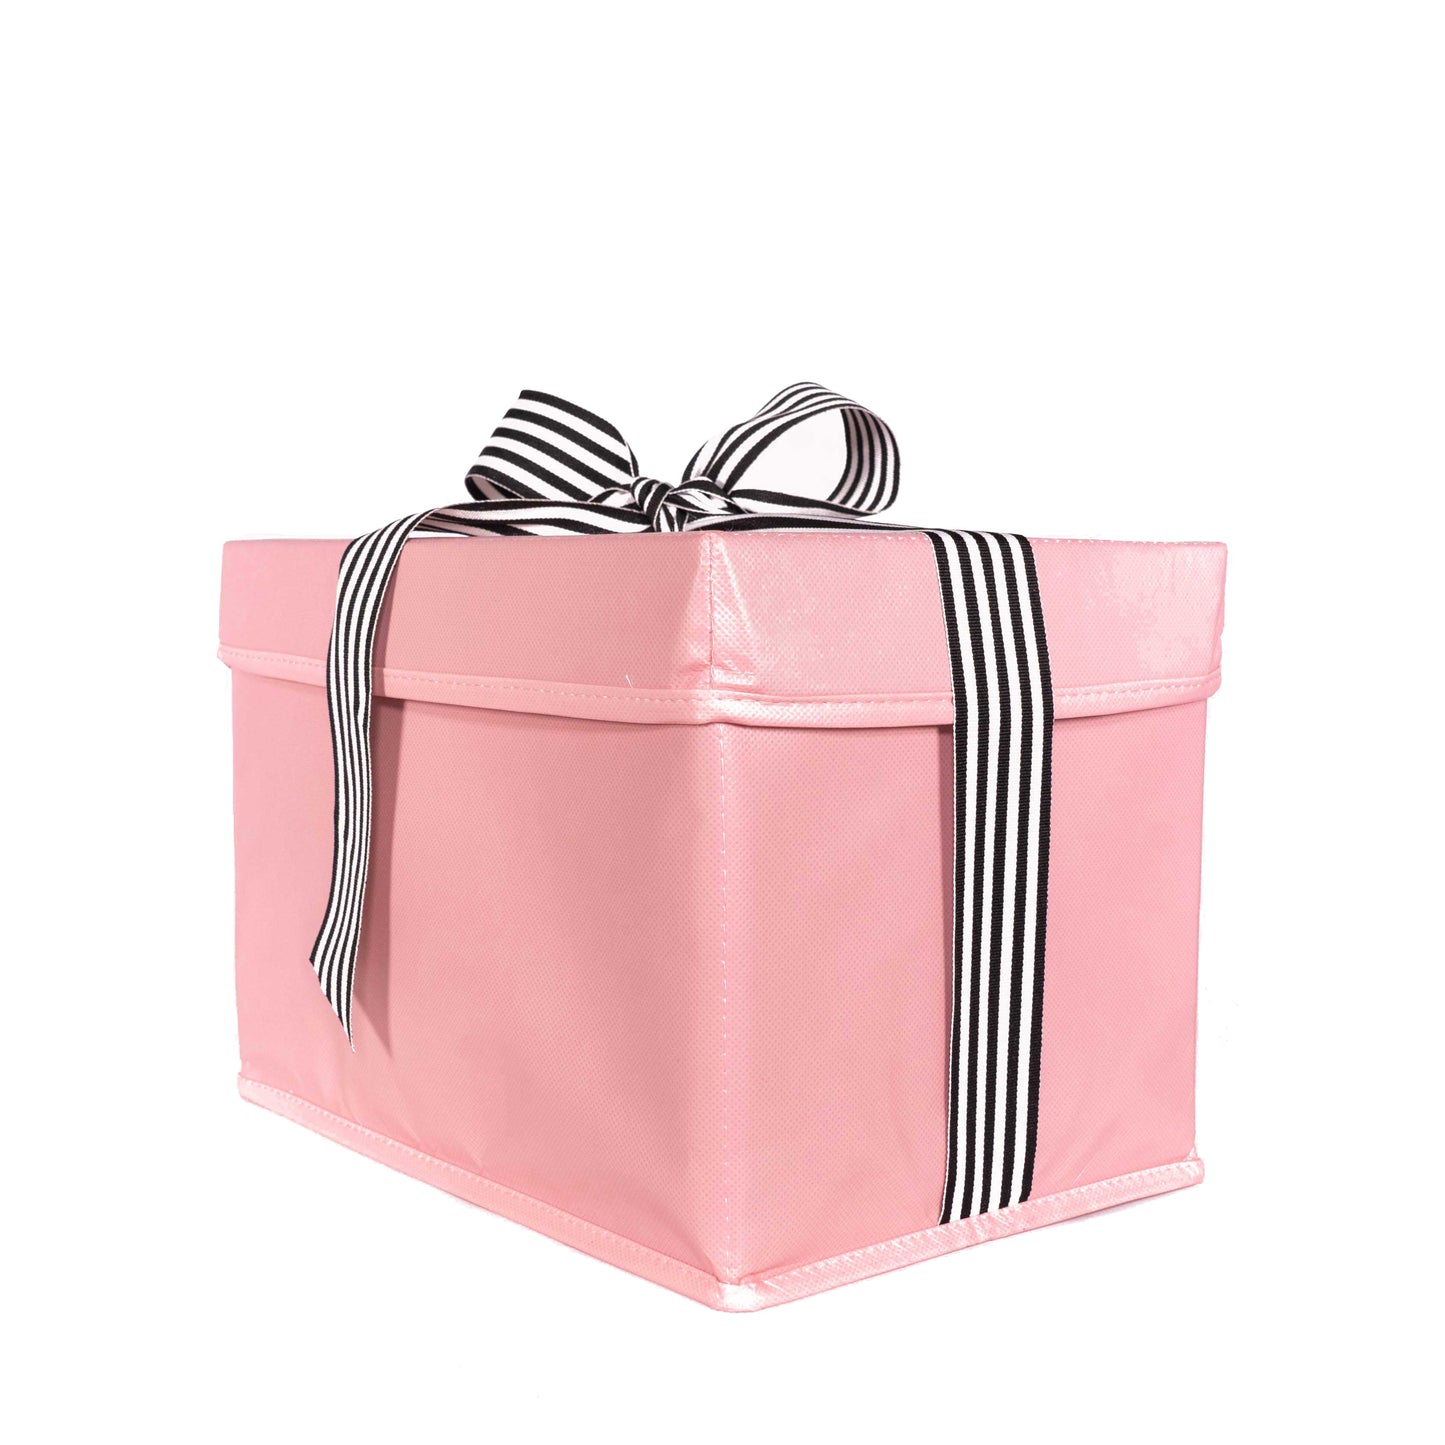 Small shoebox sized pink collapsible gift box with black and white grosgrain ribbon attached, great zero waste solution for sustainable and eco-friendly gift boxes - EverWrap